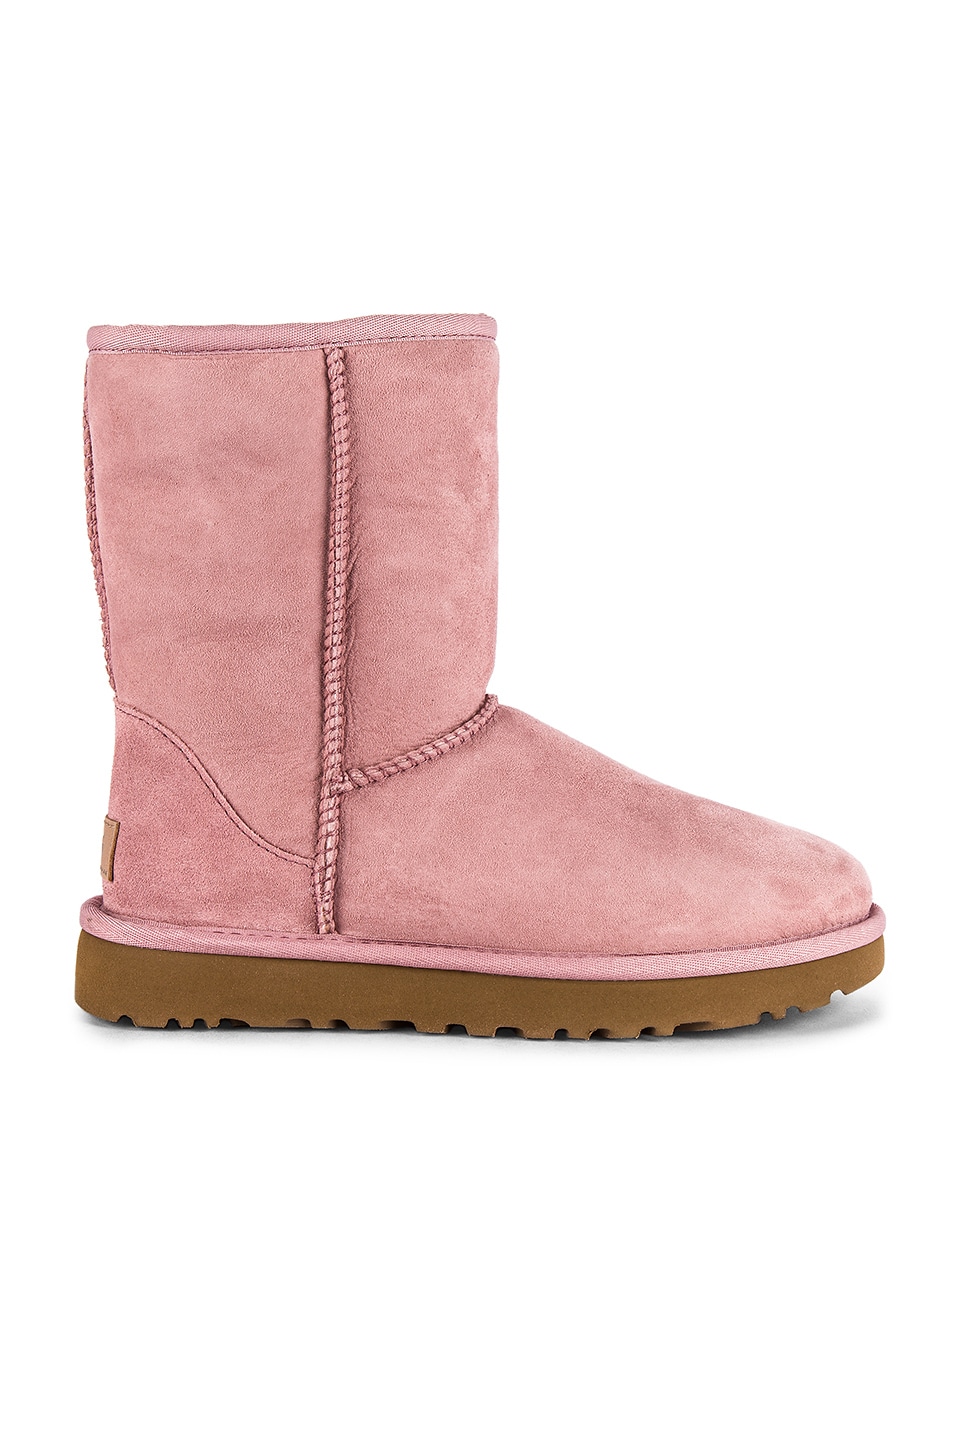 UGG Classic Short II Boot in Pink 